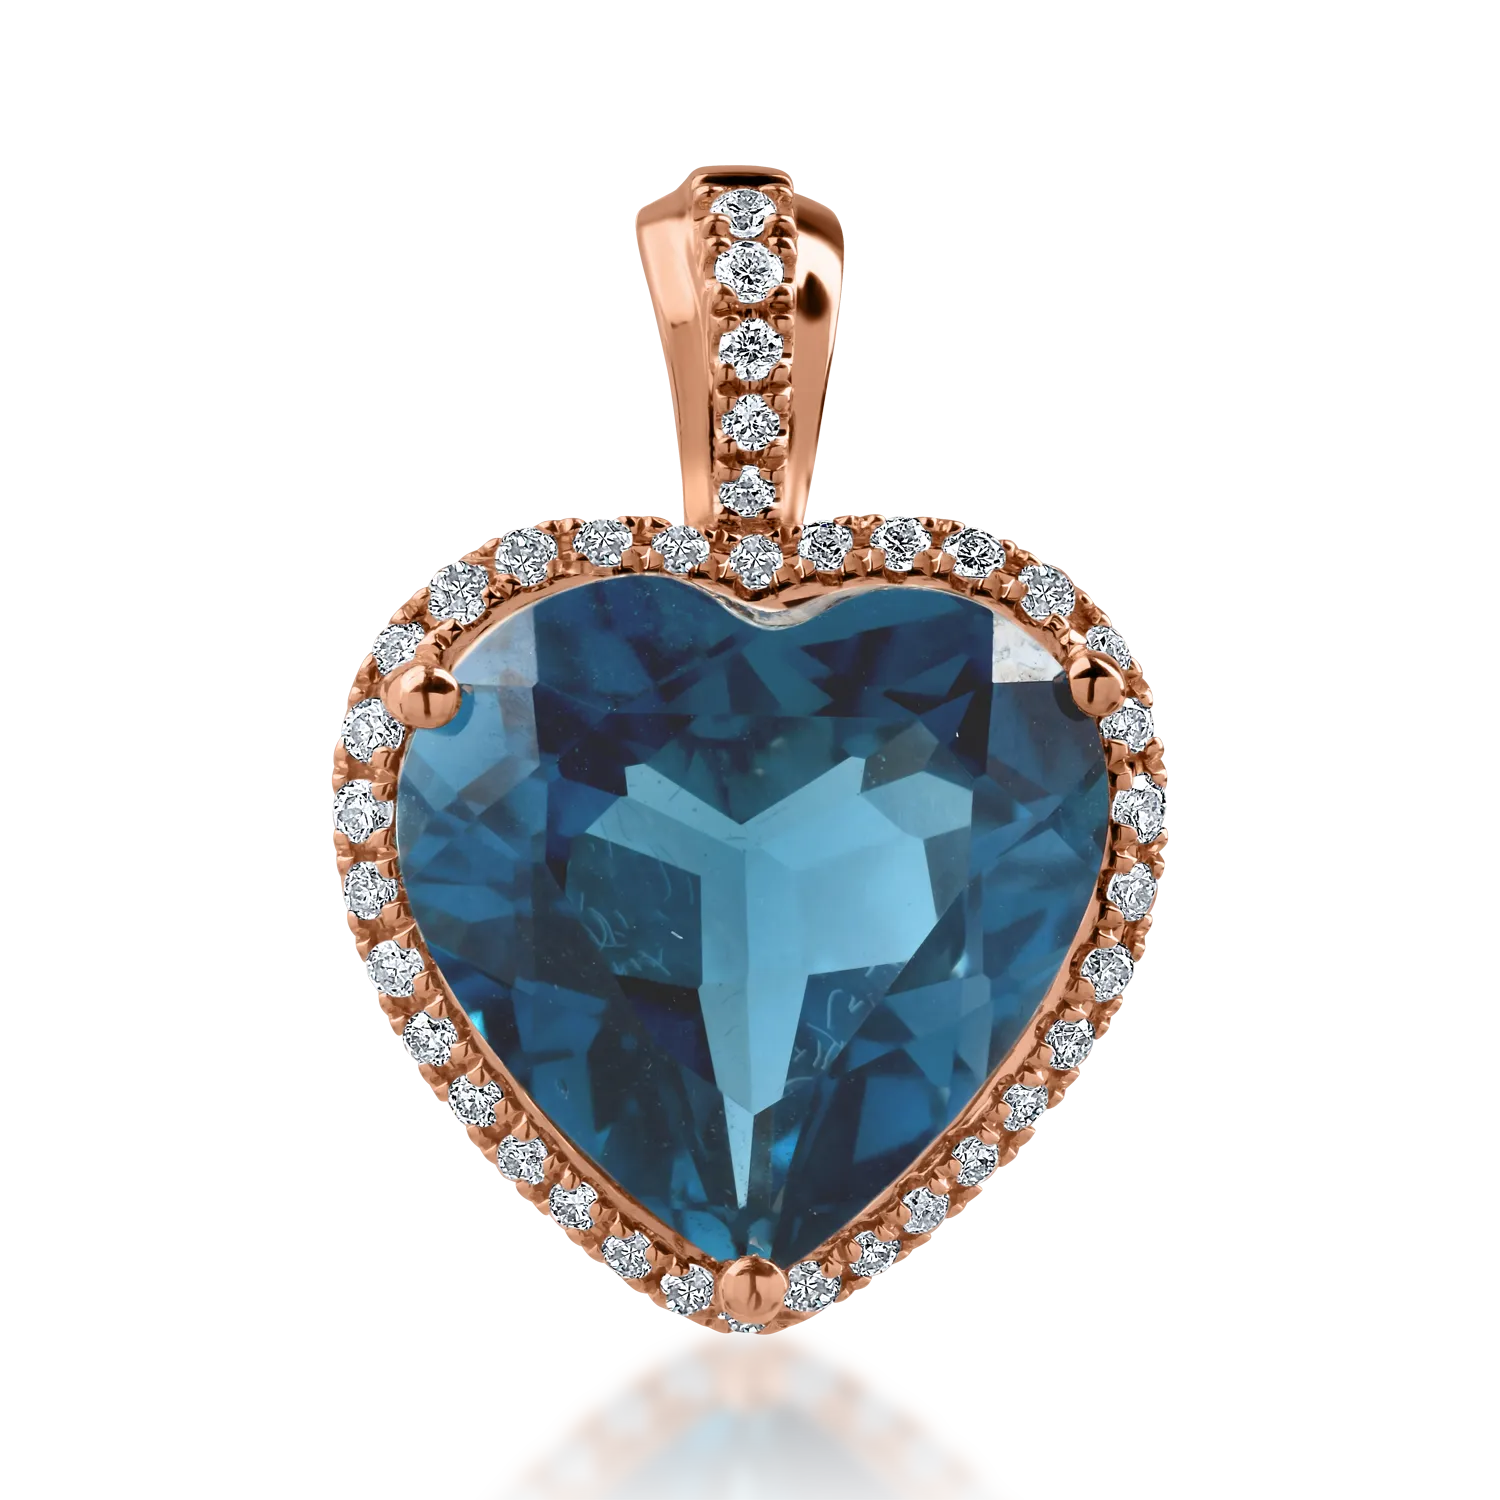 Rose gold heart pendant with 5.4ct london blue topaz and 0.16ct diamonds